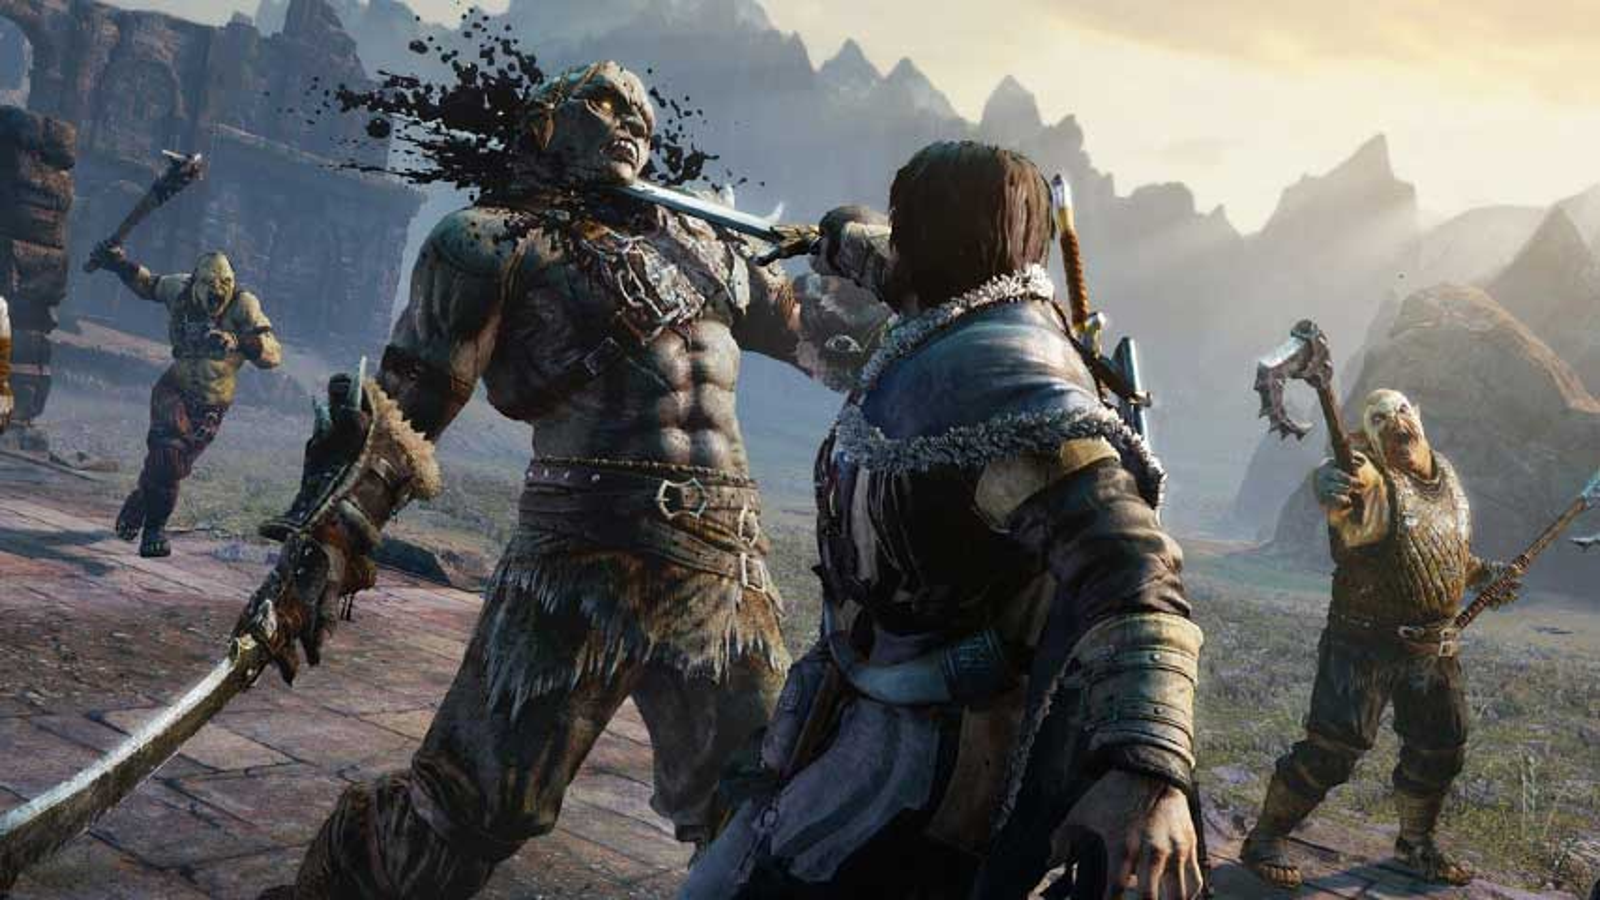  Middle-Earth: Shadow of Mordor GOTY (PS4) : Video Games